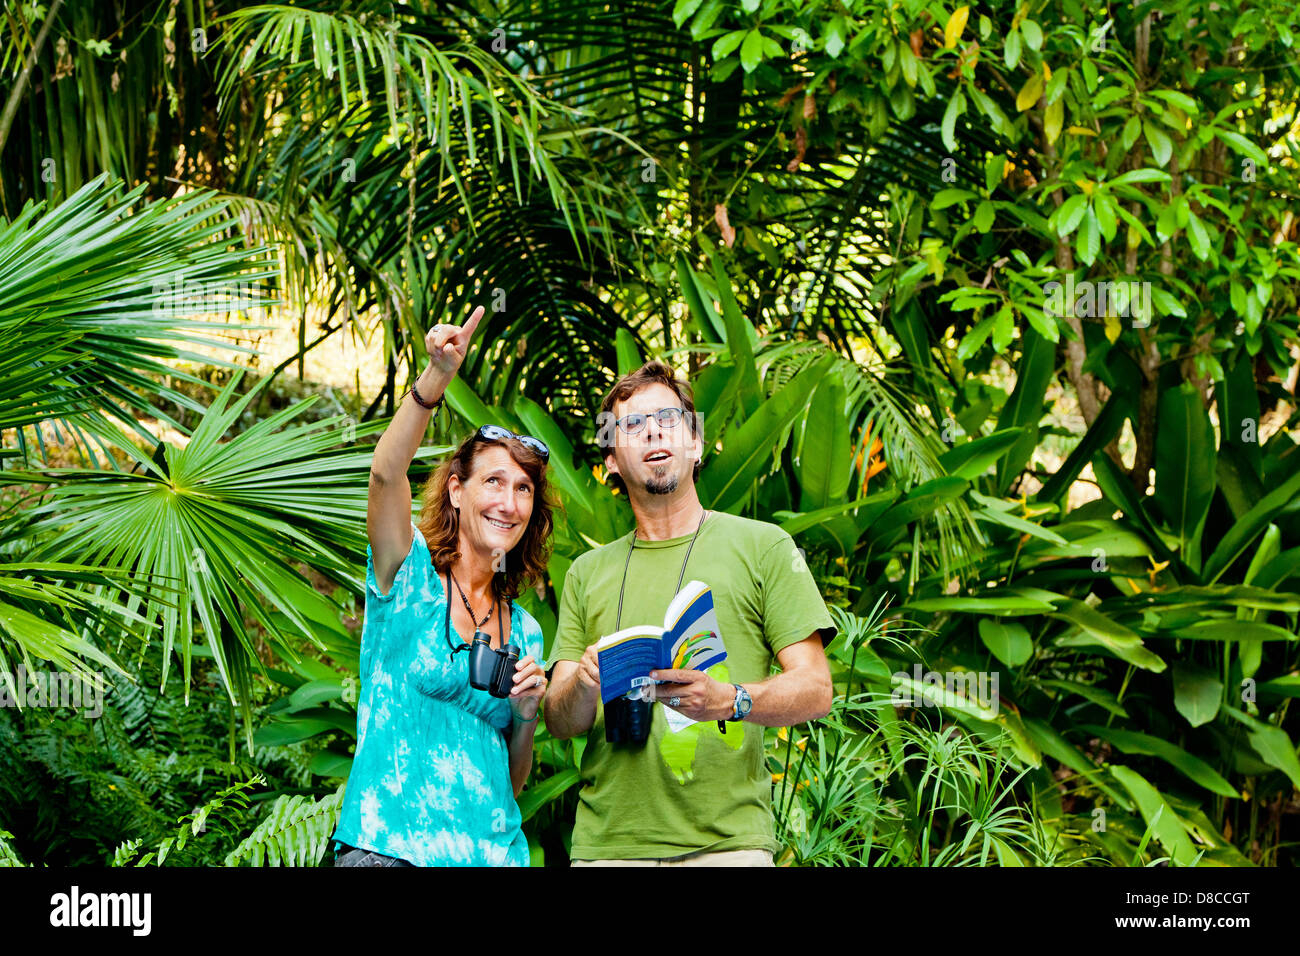 Man and woman bird watching in jungle Stock Photo